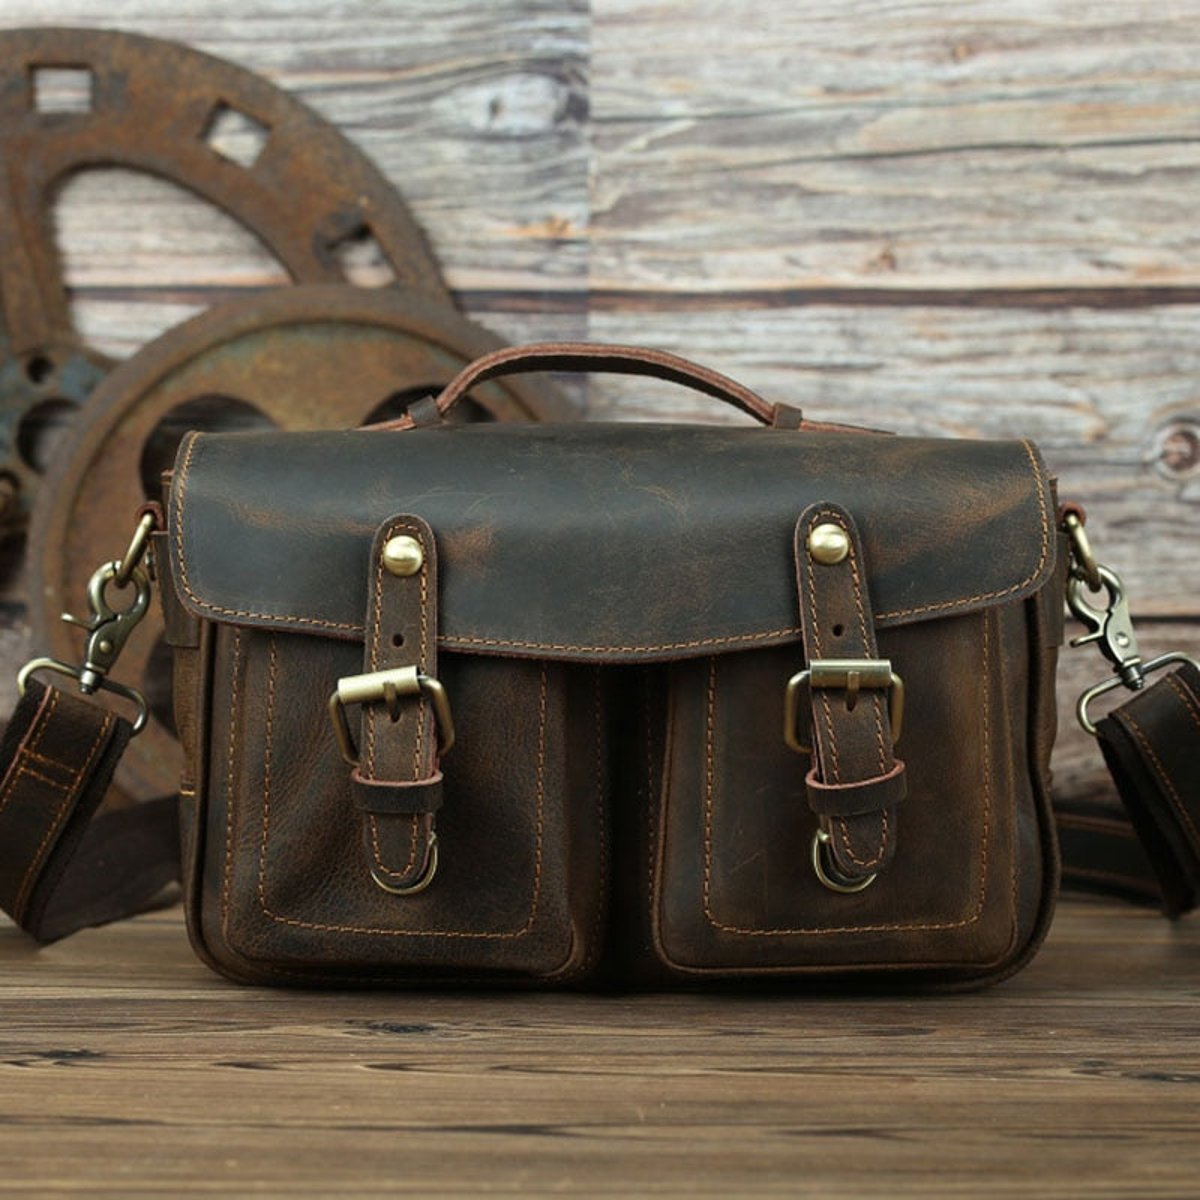 Steel Horse Leather The Faust Leather Crossbody Vintage Camera Messenger Bag - Brown